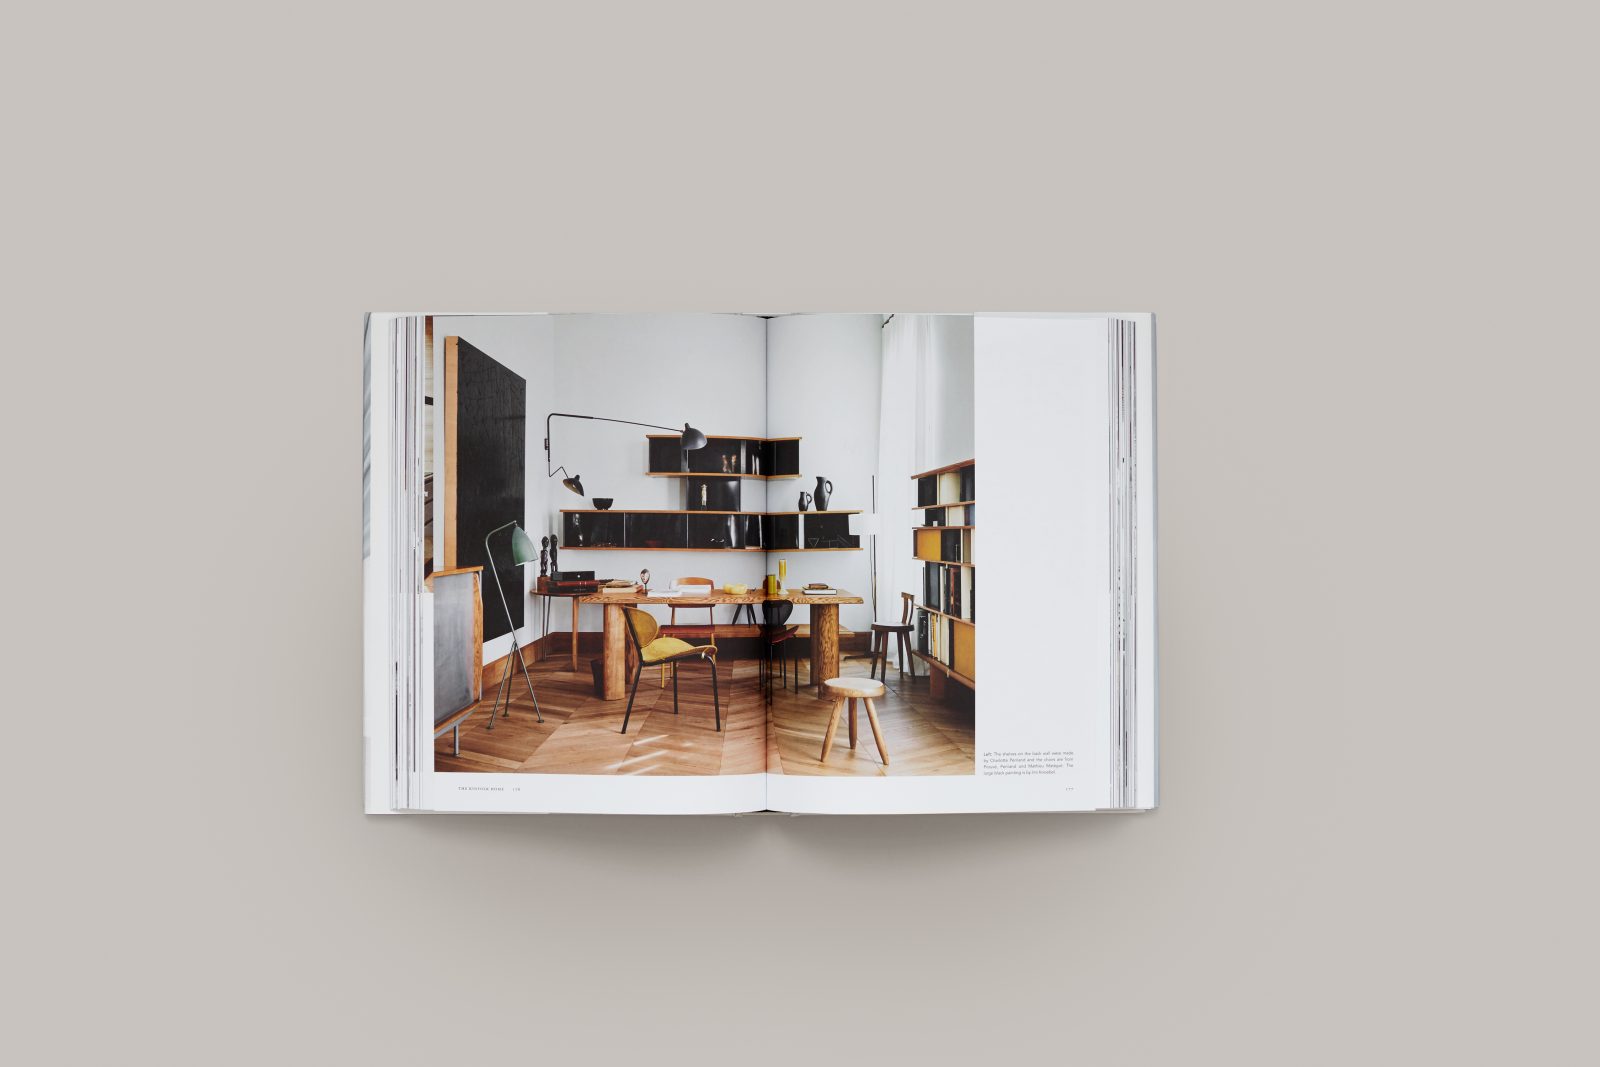 The Kinfolk Home book: Interiors for Slowing Living by Nathan Williams